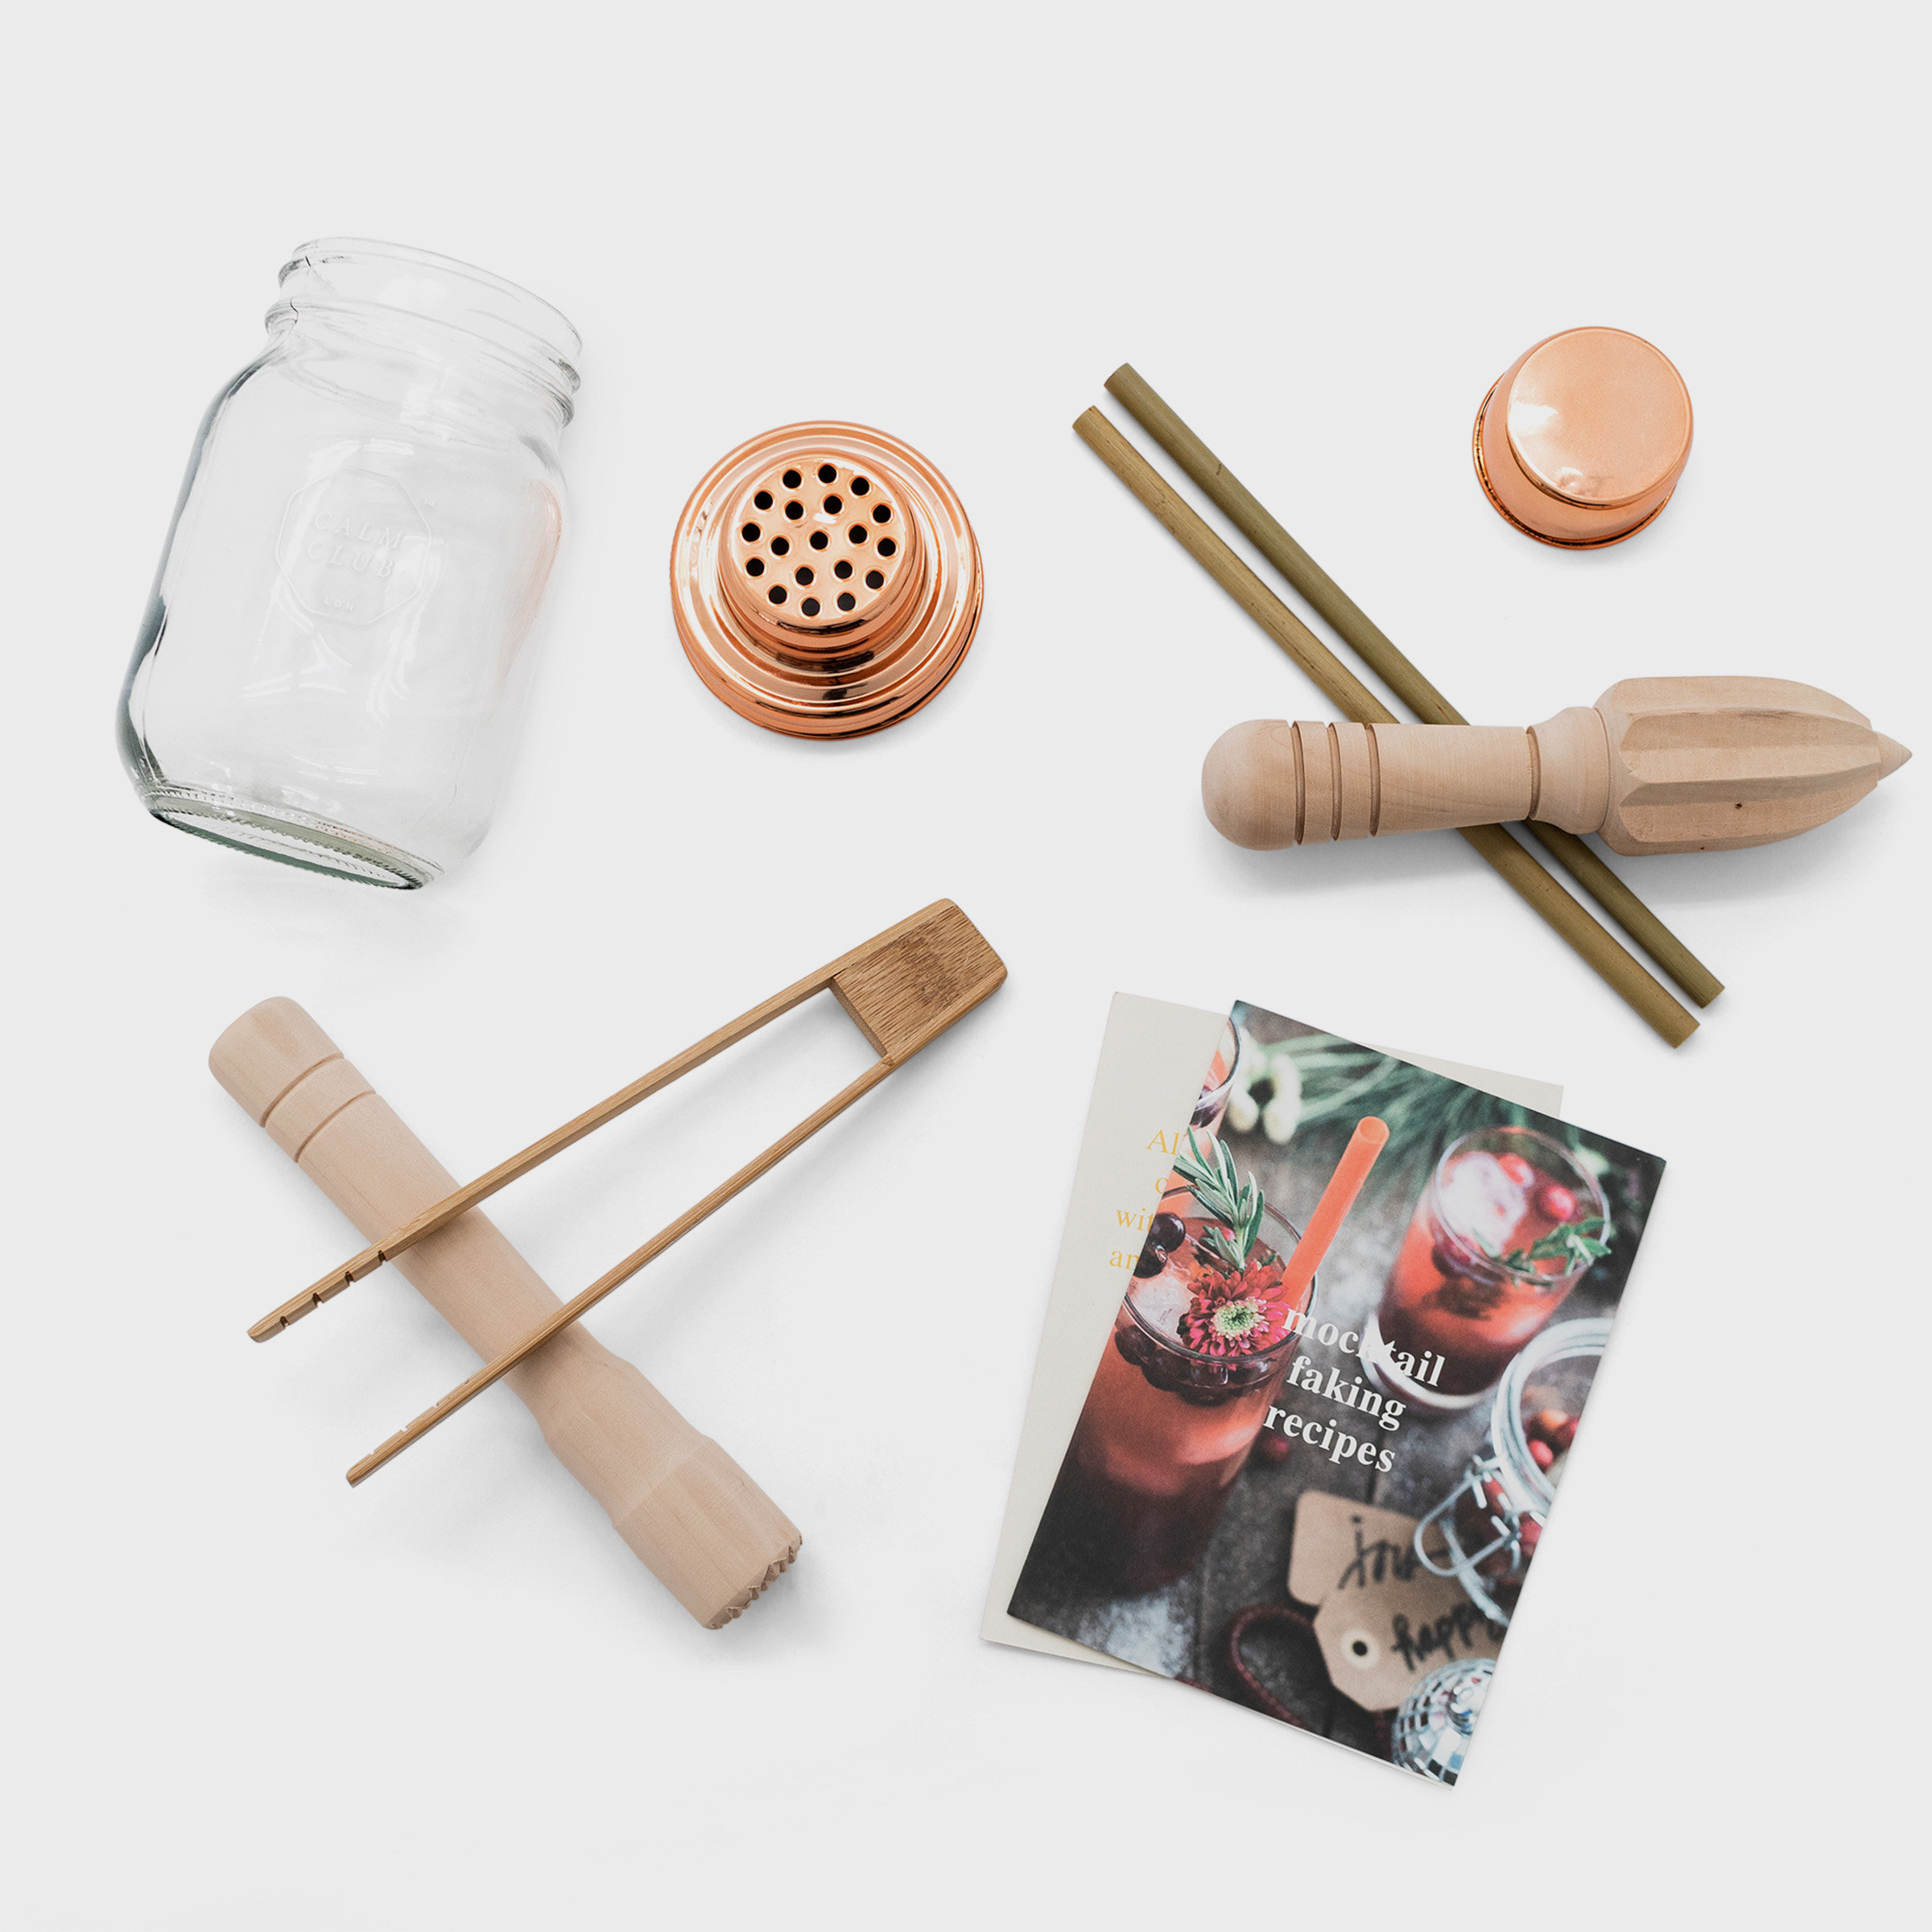 Calm Club Non-alcoholic cocktail making kit Content